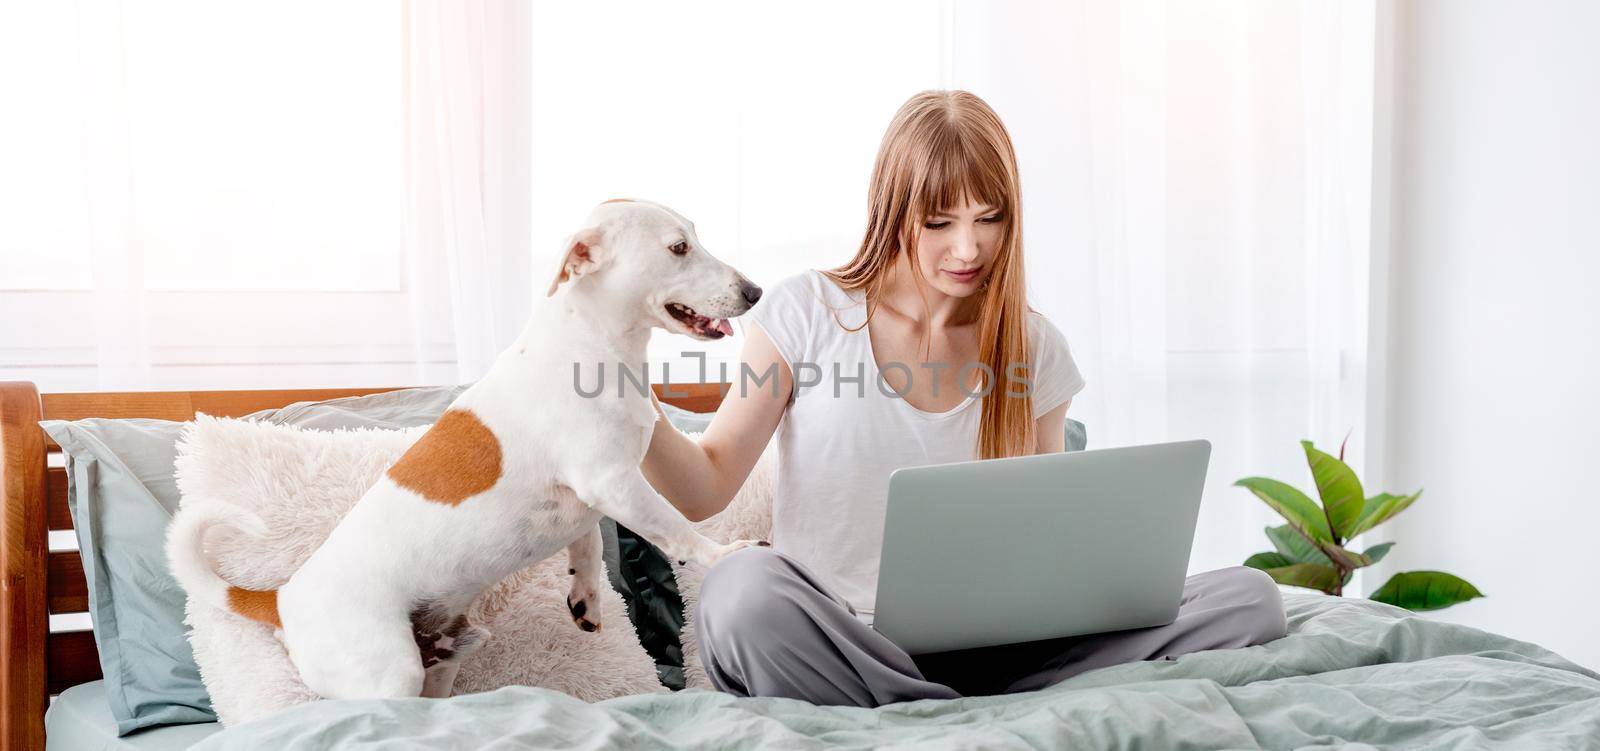 Girl with dog and laptop in the bed by tan4ikk1